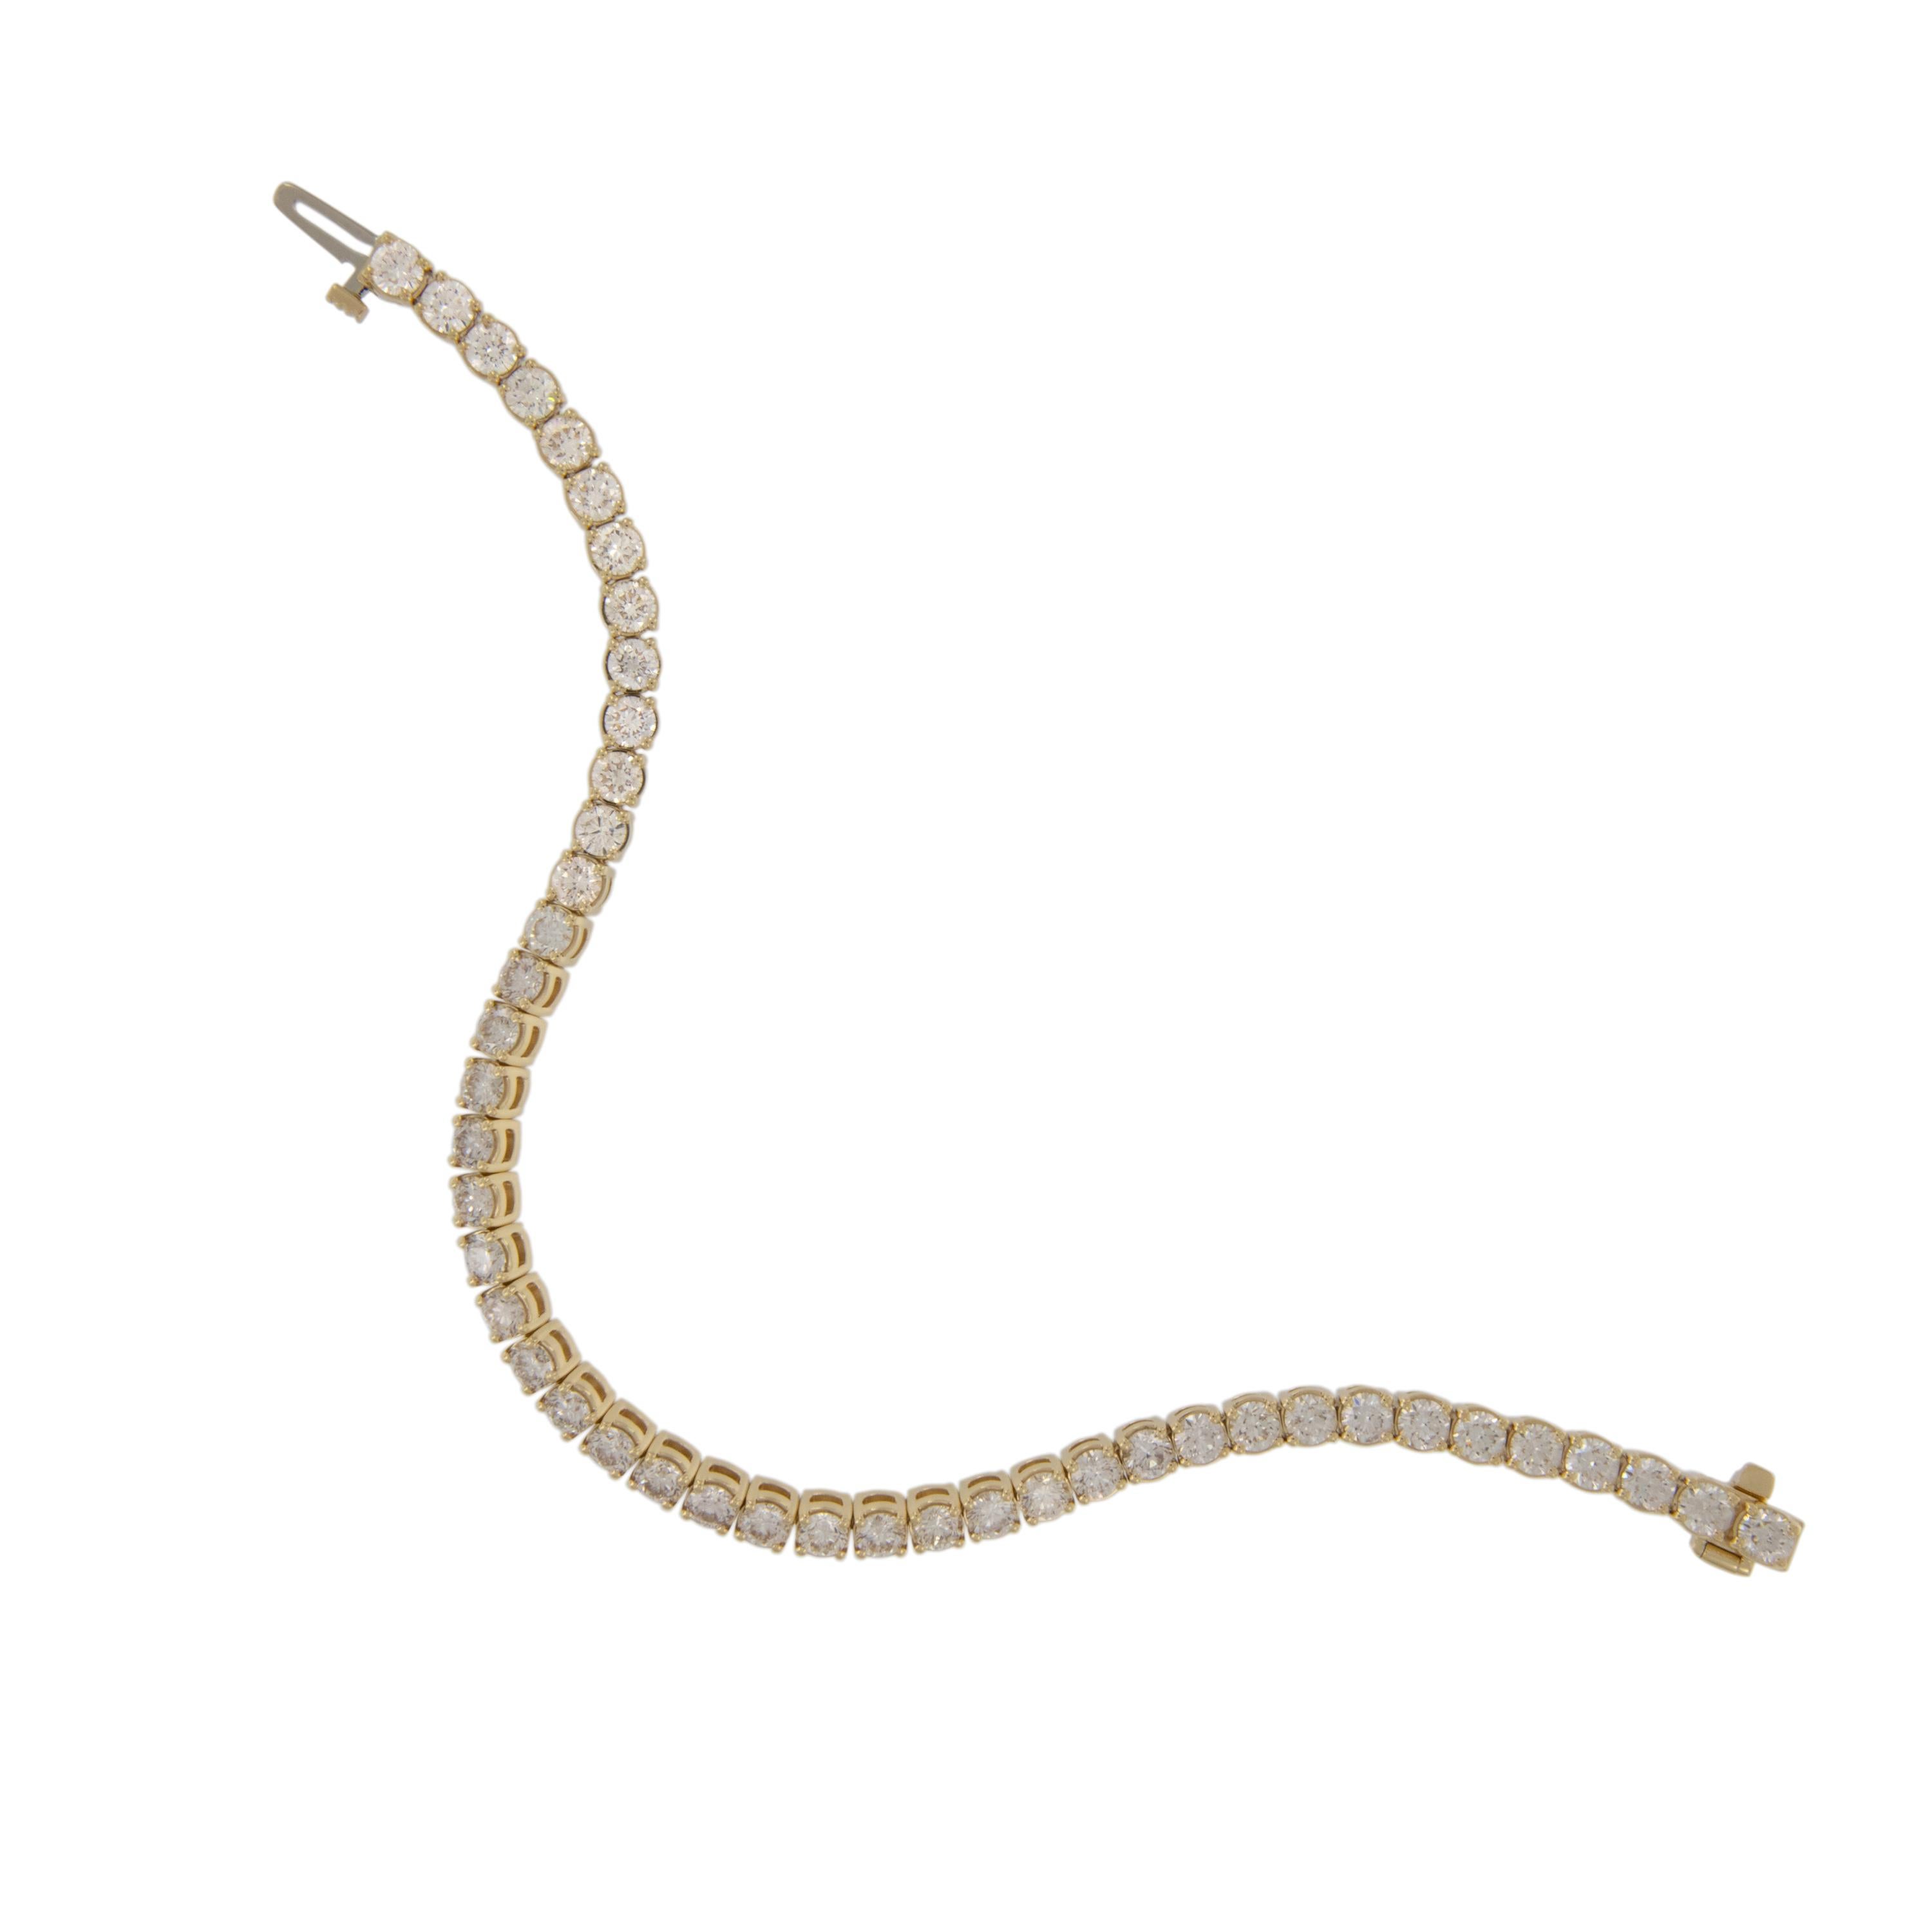 Worn on its own or stacked with other bangles, this piece is a staple in any jewelry collection. Made from rich 18 karat yellow gold and set with 45 RBC diamonds = 7.32 Cttw of VS, G - H quality this bracelet will feel just at home on your wrist